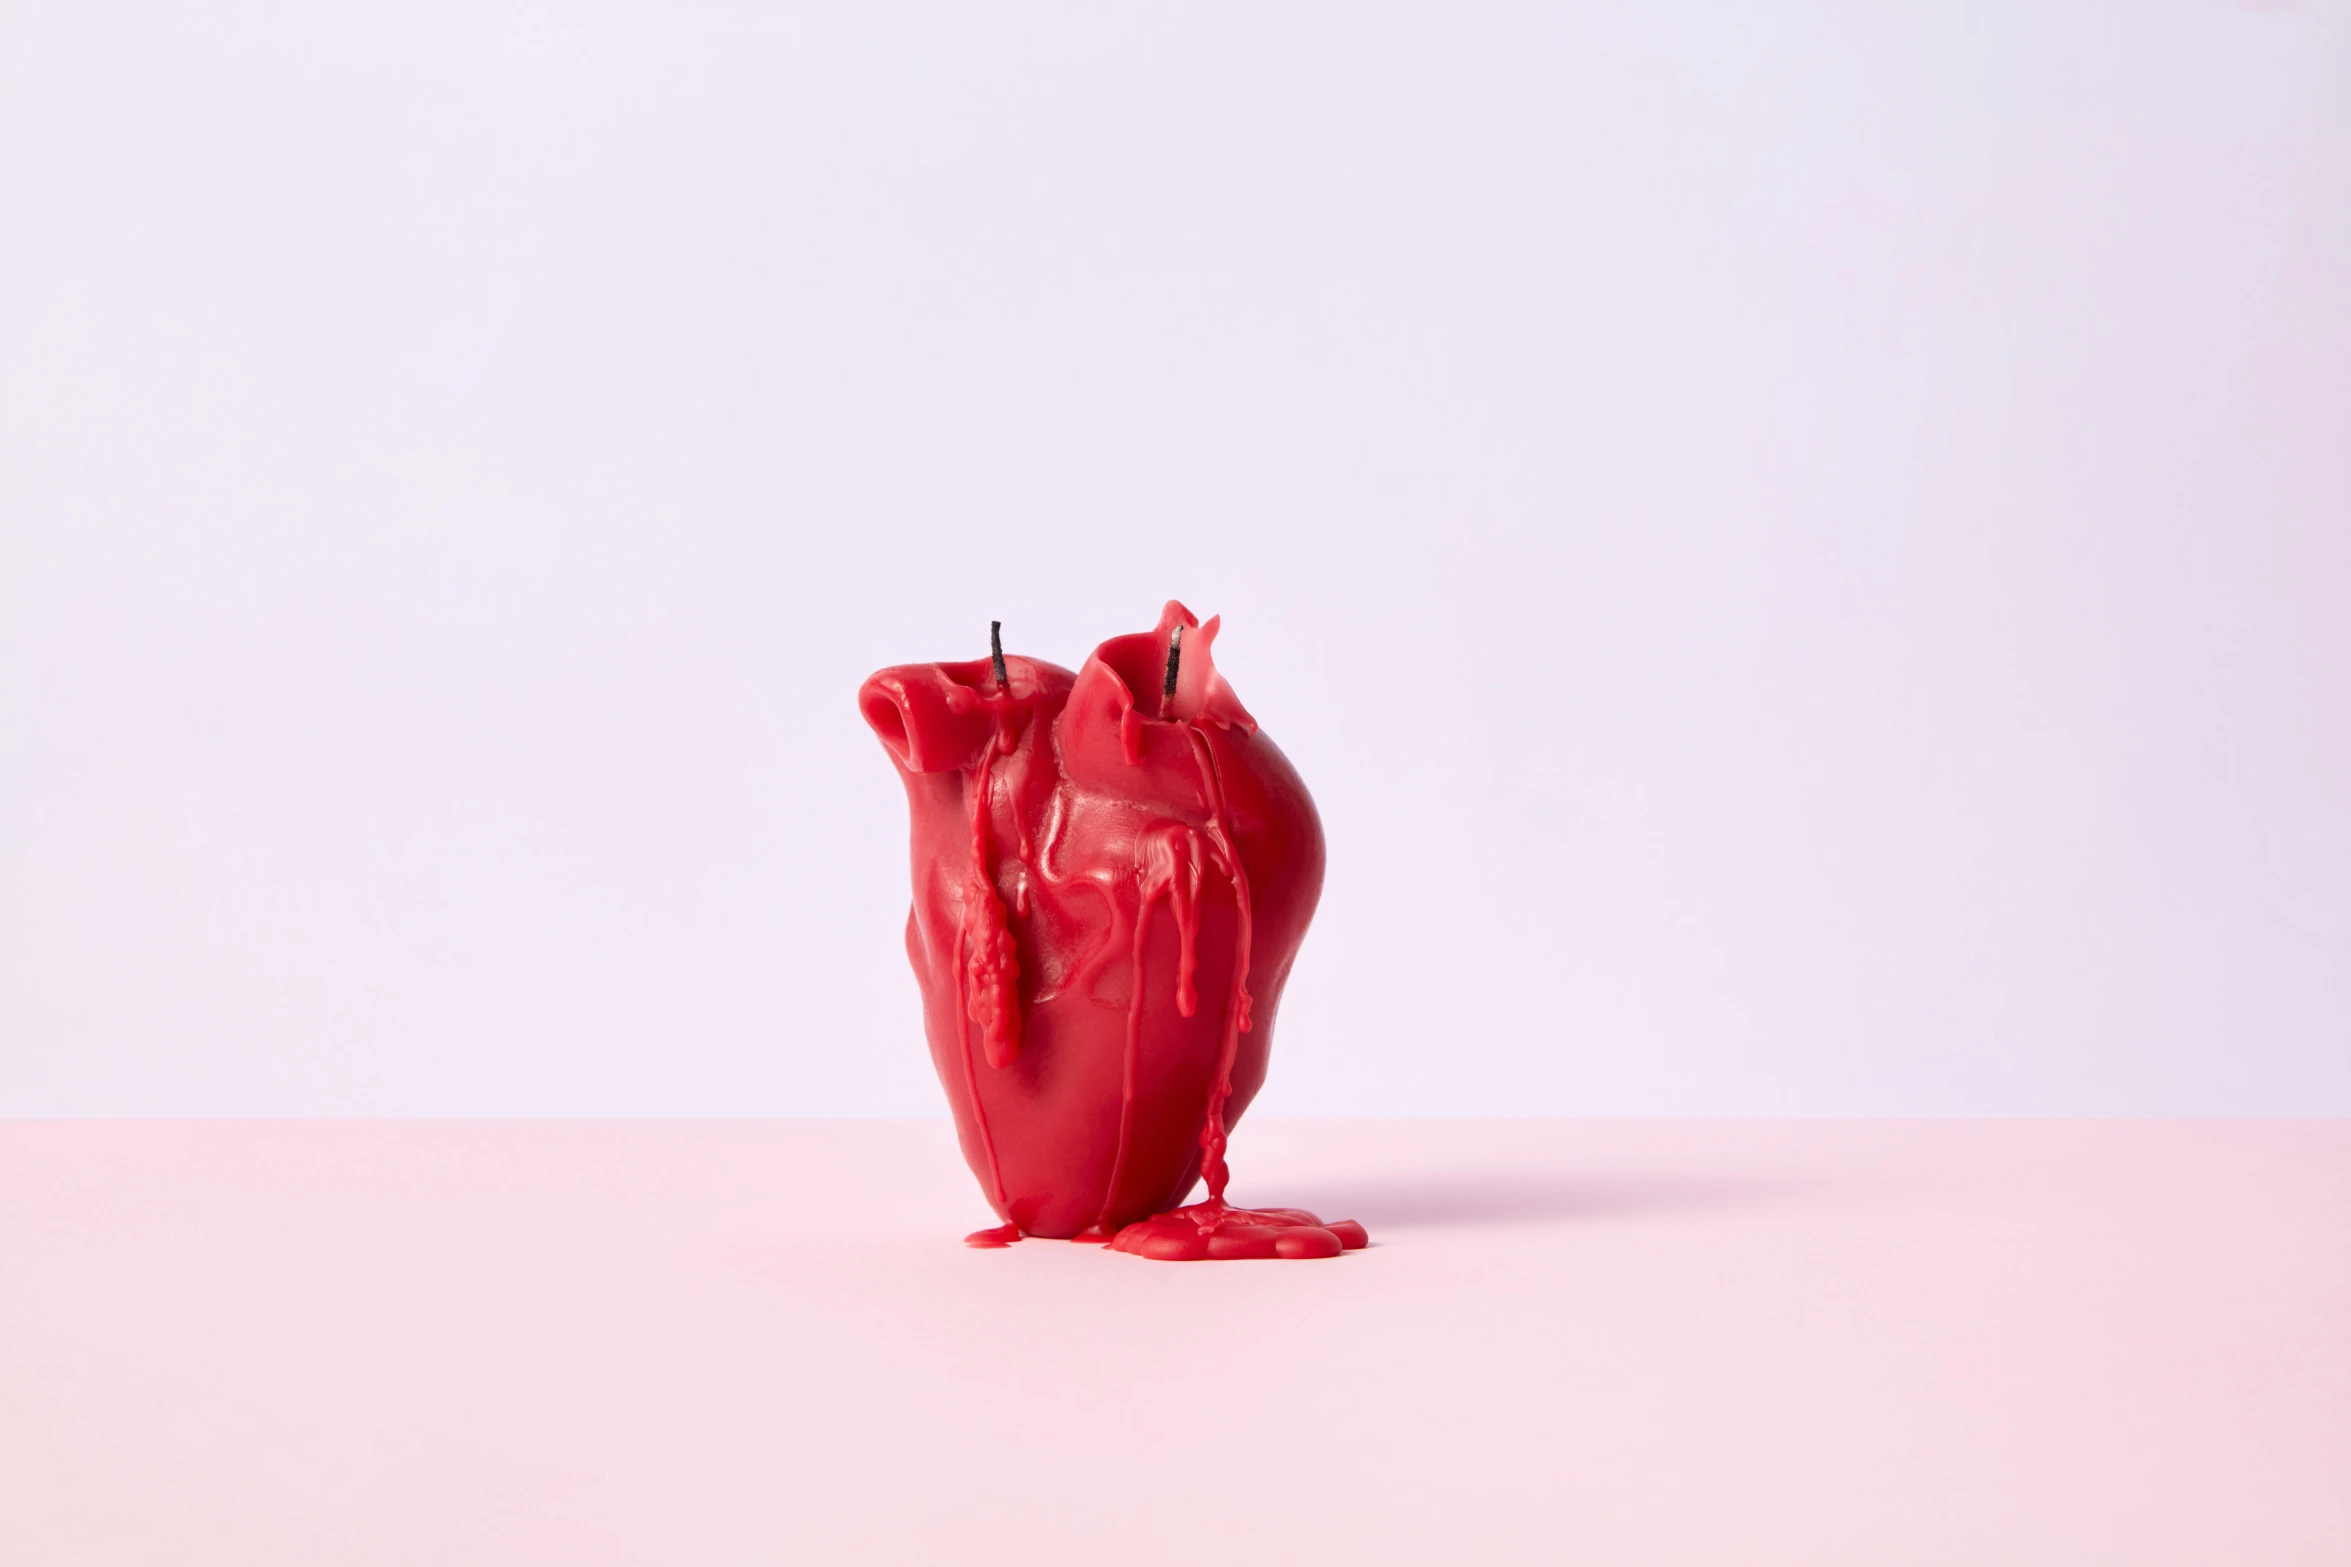 a red candle sitting on top of a pink table, by Gavin Hamilton, trending on pexels, hyperrealism, 3d model of a human heart, paint drips liquid wax, comme des garcon campaign, dwell